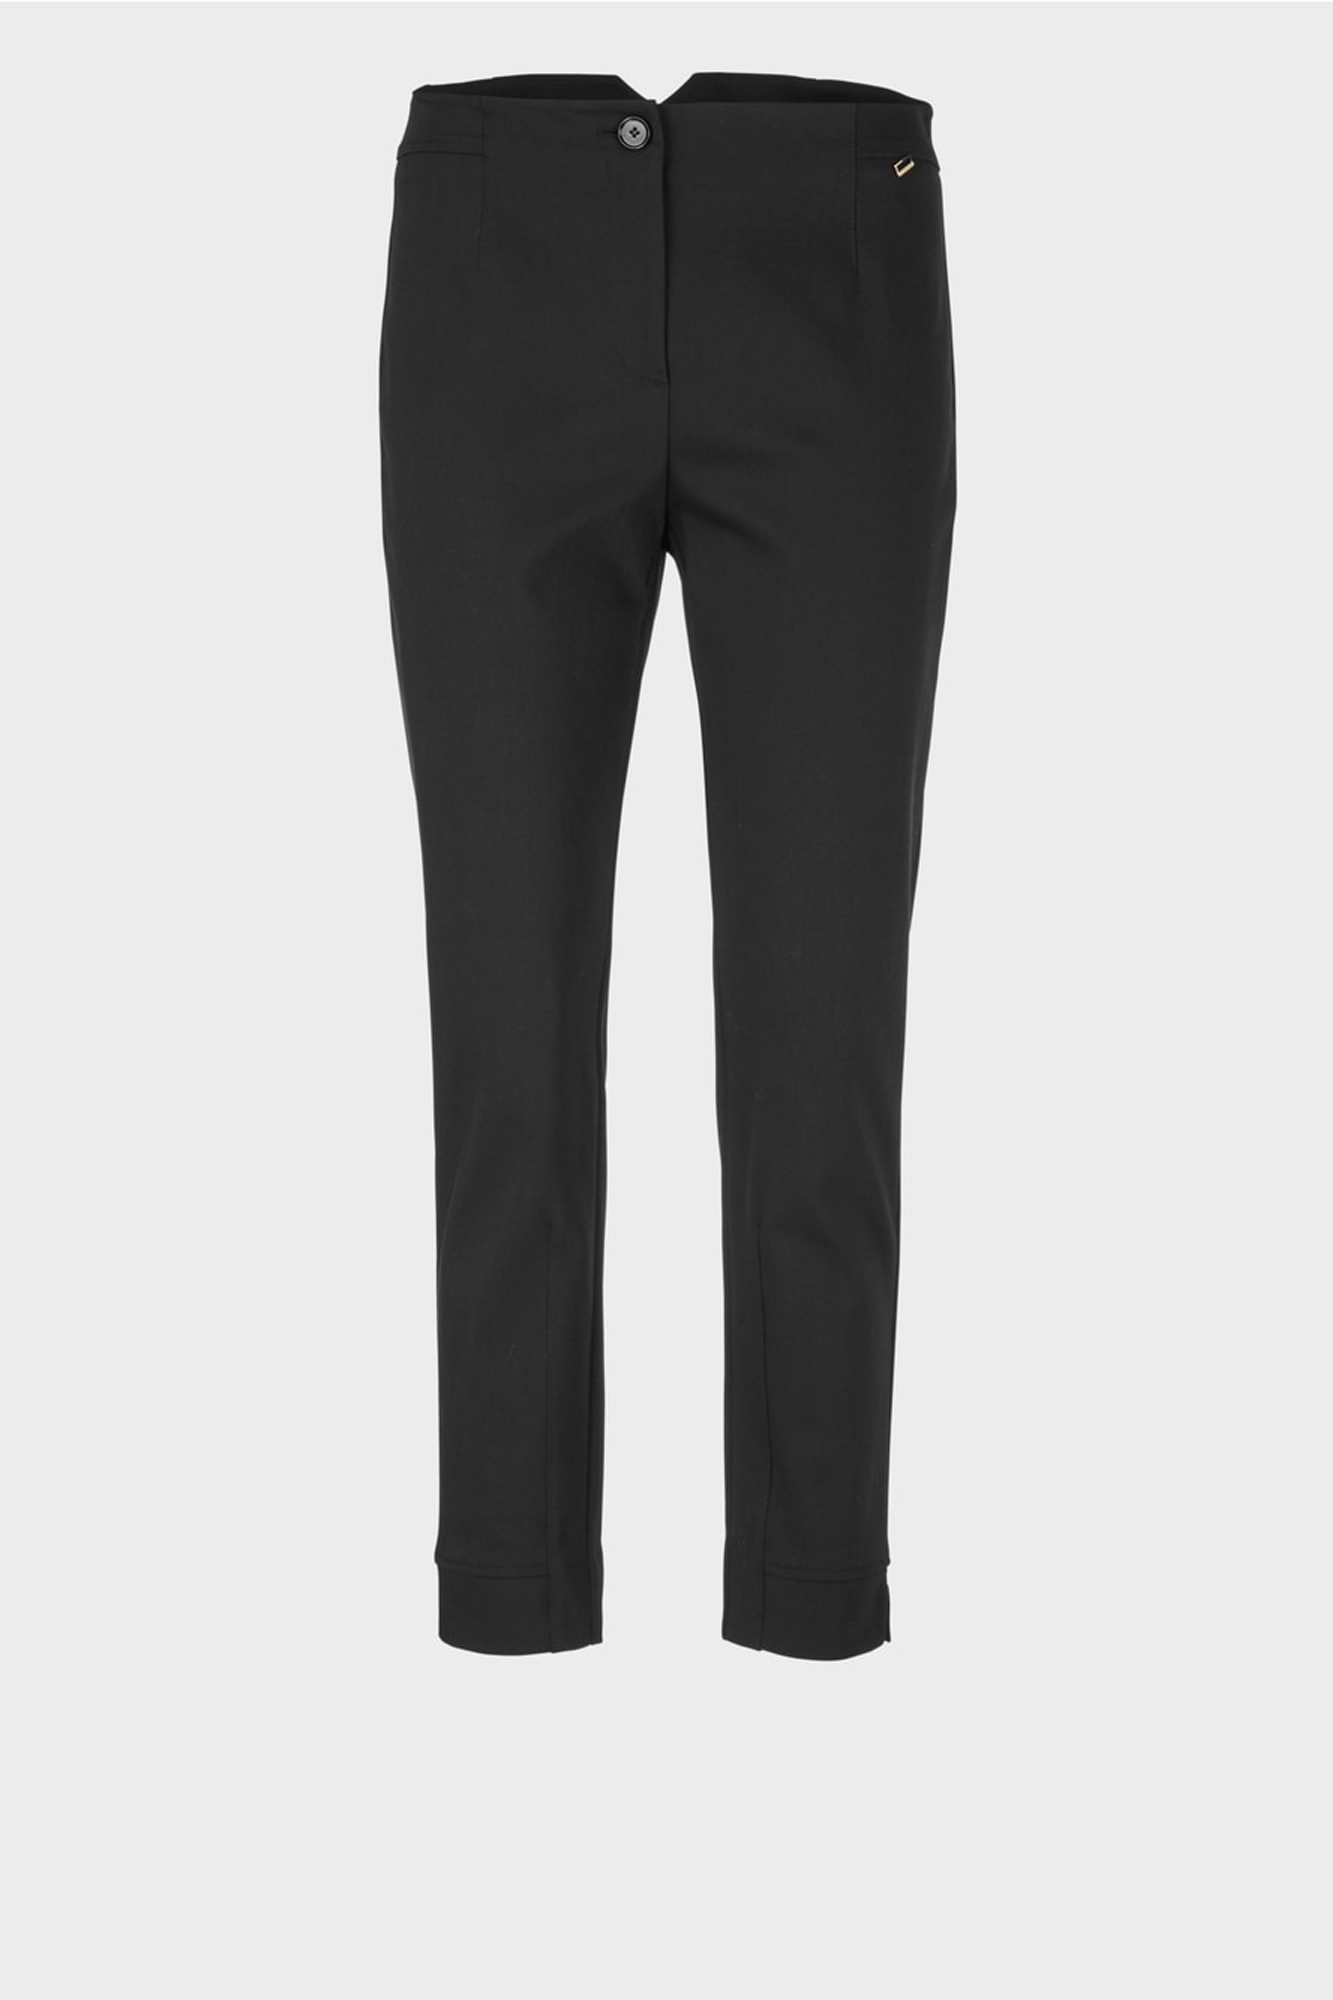 The Split Slim Pants from Marc Cain are tailored for a snug fit. Crafted from a blend of cotton and elastane, they have a zip and button closure. An airy slit waistband and decorative stitching add to the look, while a small slit at the hem gives an extra touch of style. Perfect for everyday wear.